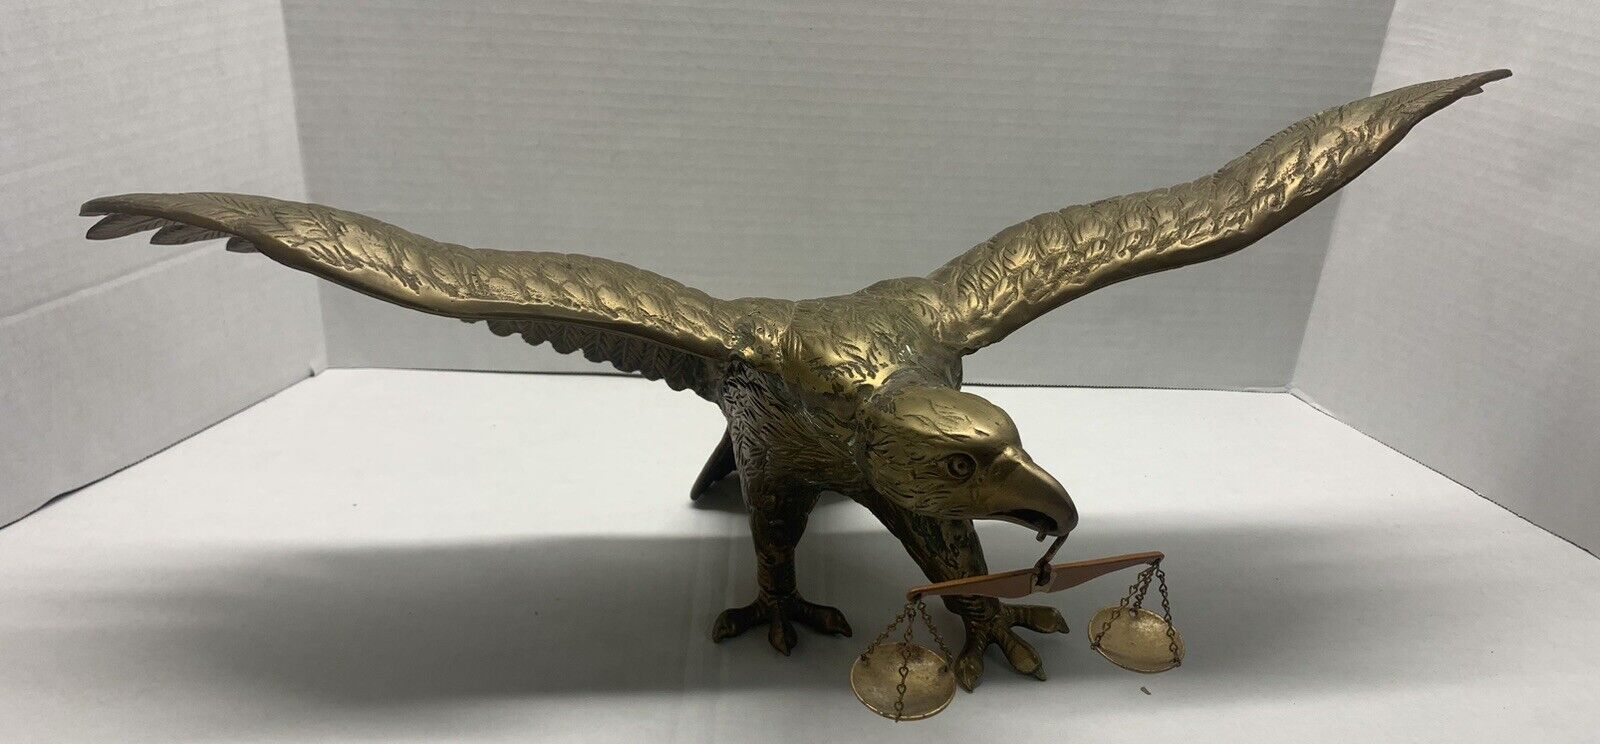 VERY RARE VINTAGE Solid Brass Eagle Statue W/ORIGINAL SCALE OF JUSTICE 23.5”